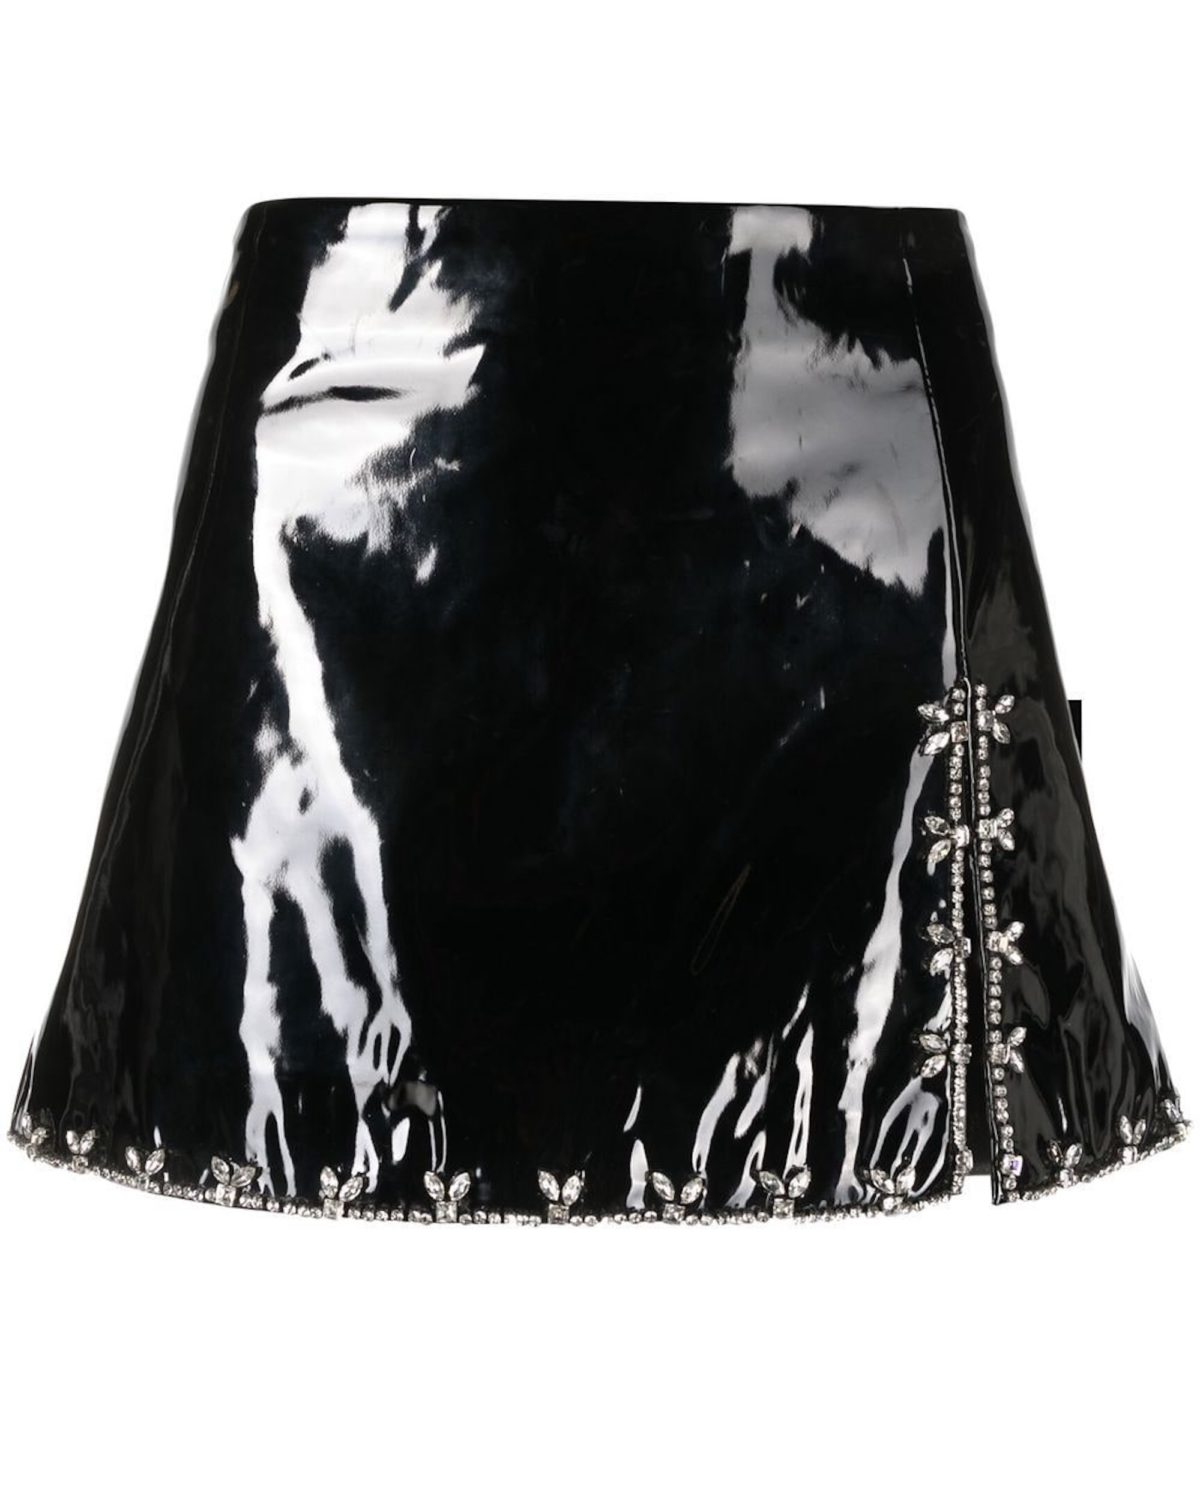 Patent Leather Clothes & Accessories for Your Villain Era - FASHION ...